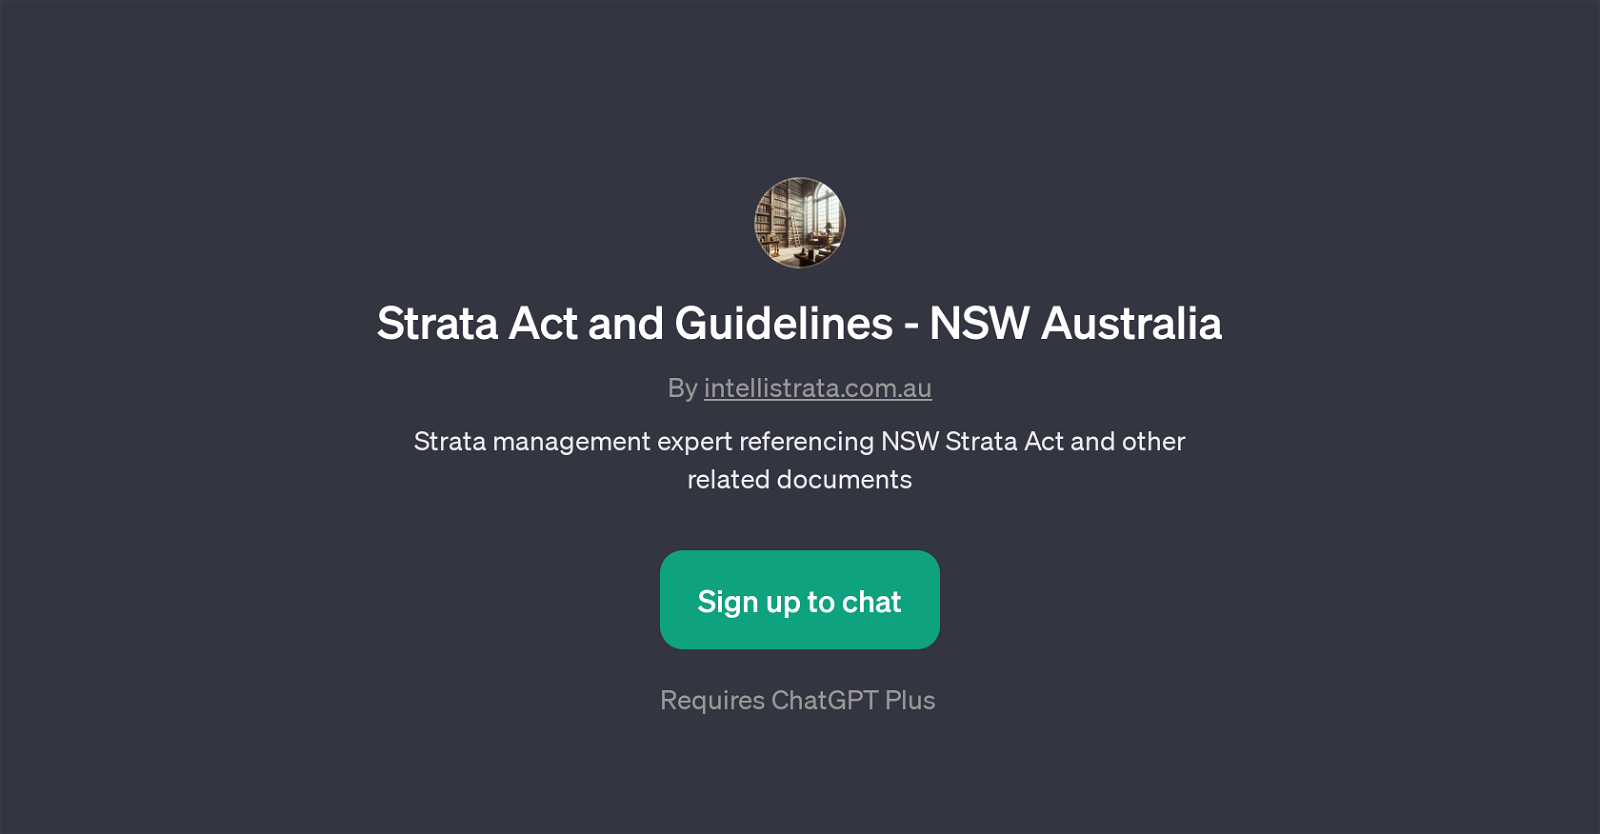 Strata Act and Guidelines - NSW Australia website